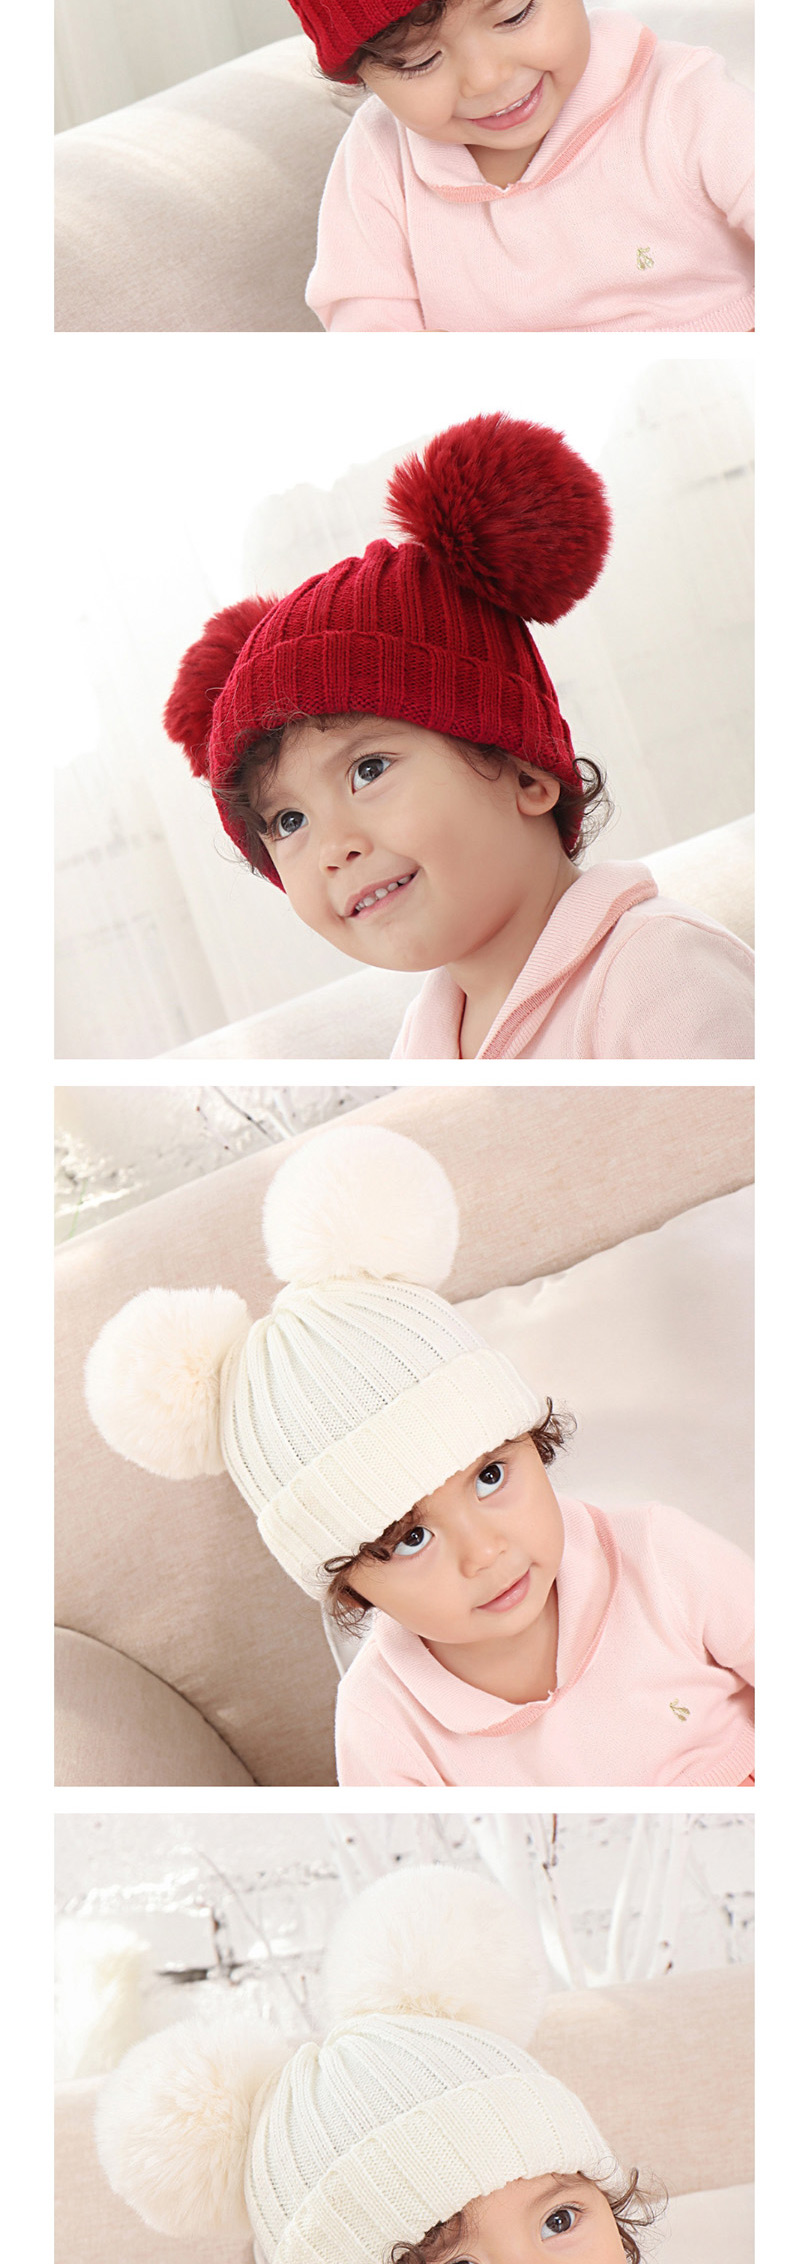 Fashion Wine Red Threaded Double-hair Ball Knitted Baby Hat,Children